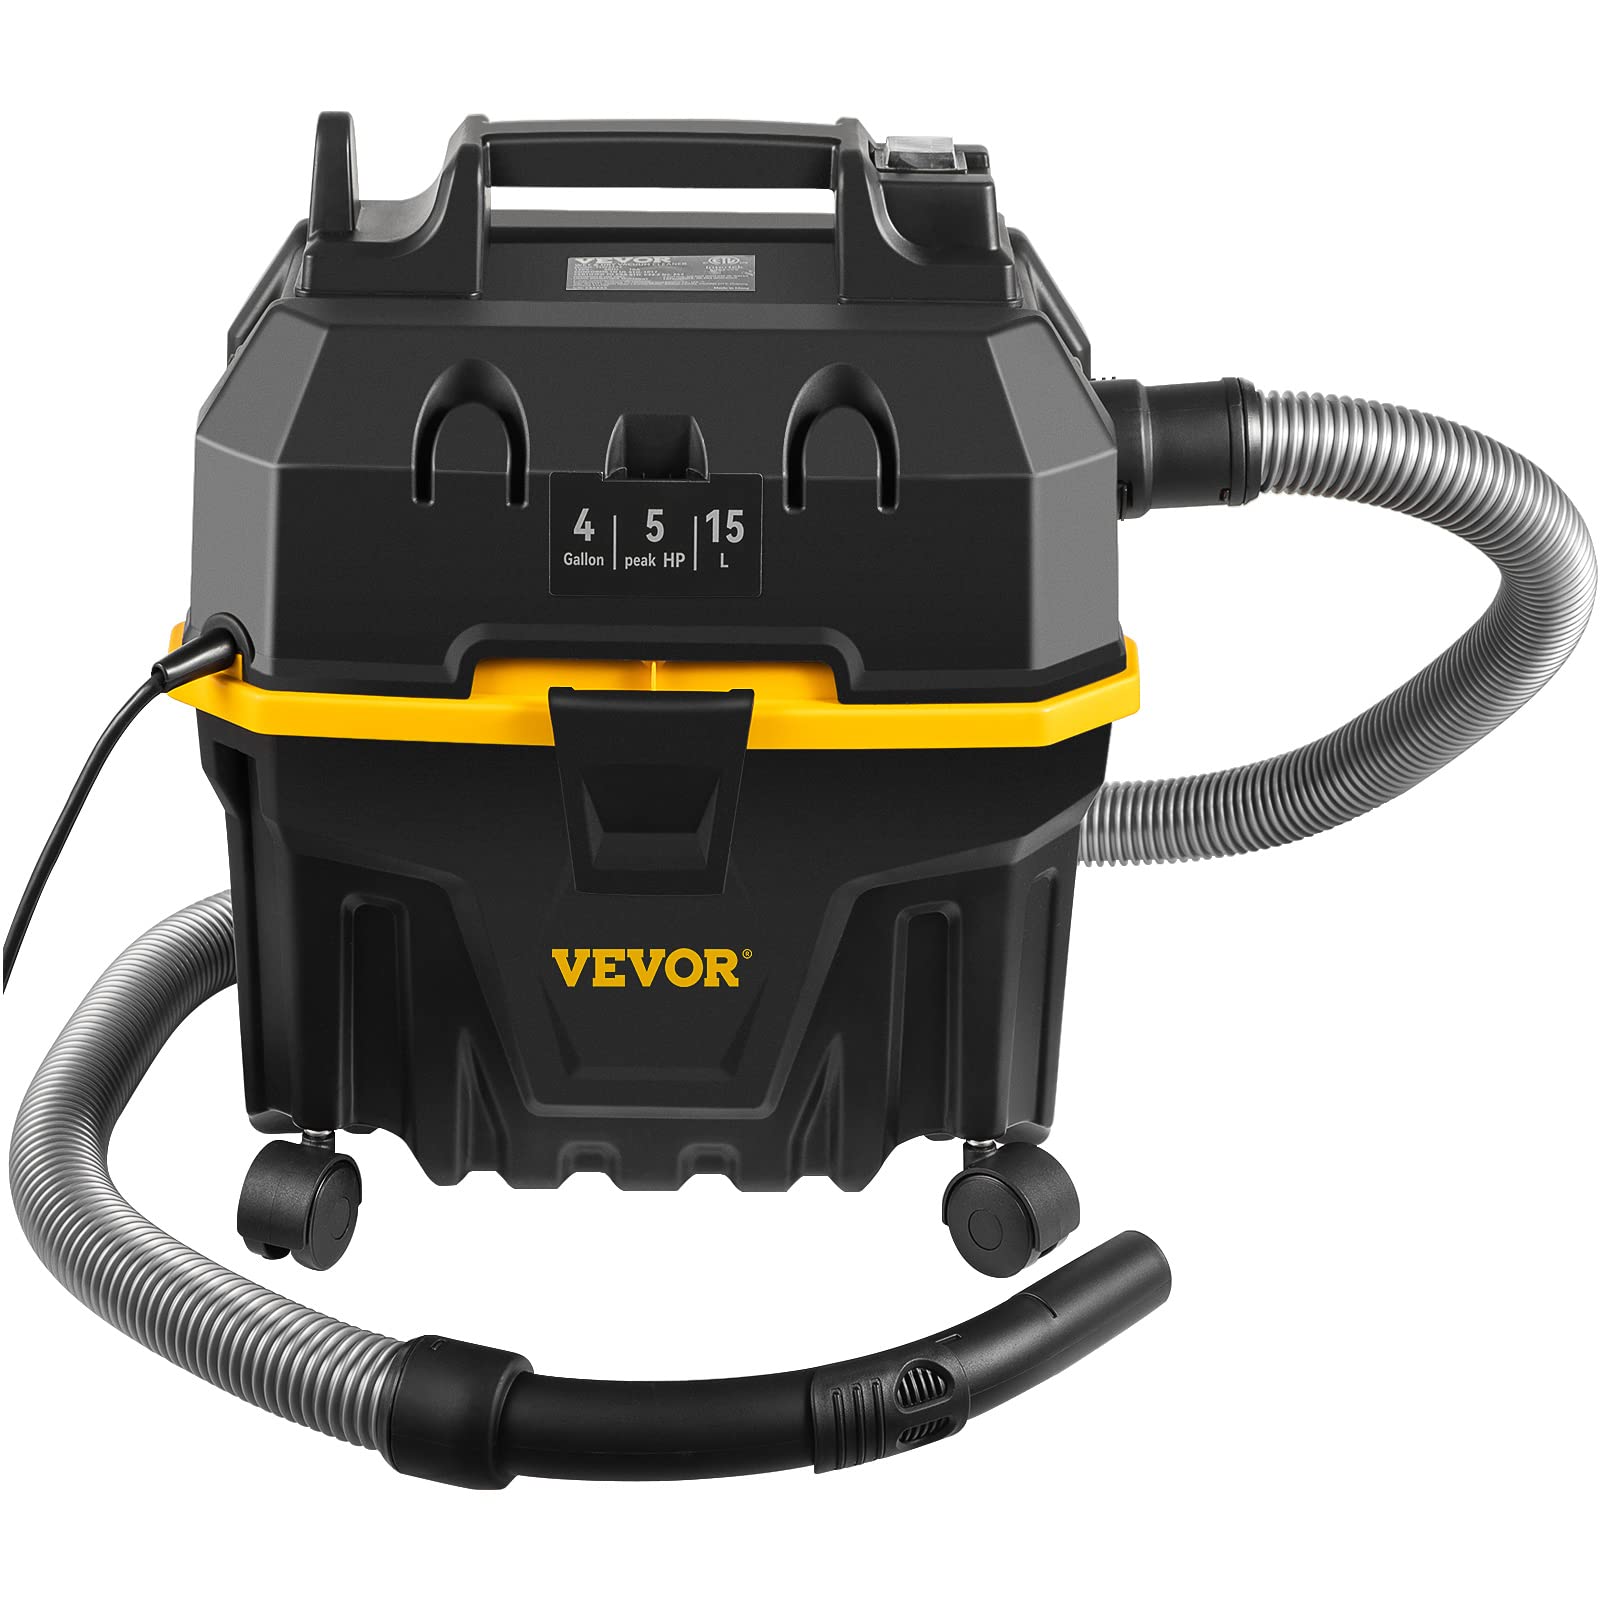 VEVOR Wet Dry Vac, 4 Gallon, 5 Peak HP, 3 in 1 Shop Vacuum with Blowing Function Portable Attachments to Clean Floor, Upholstery, Gap, Car, ETL Listed, Black/Yellow